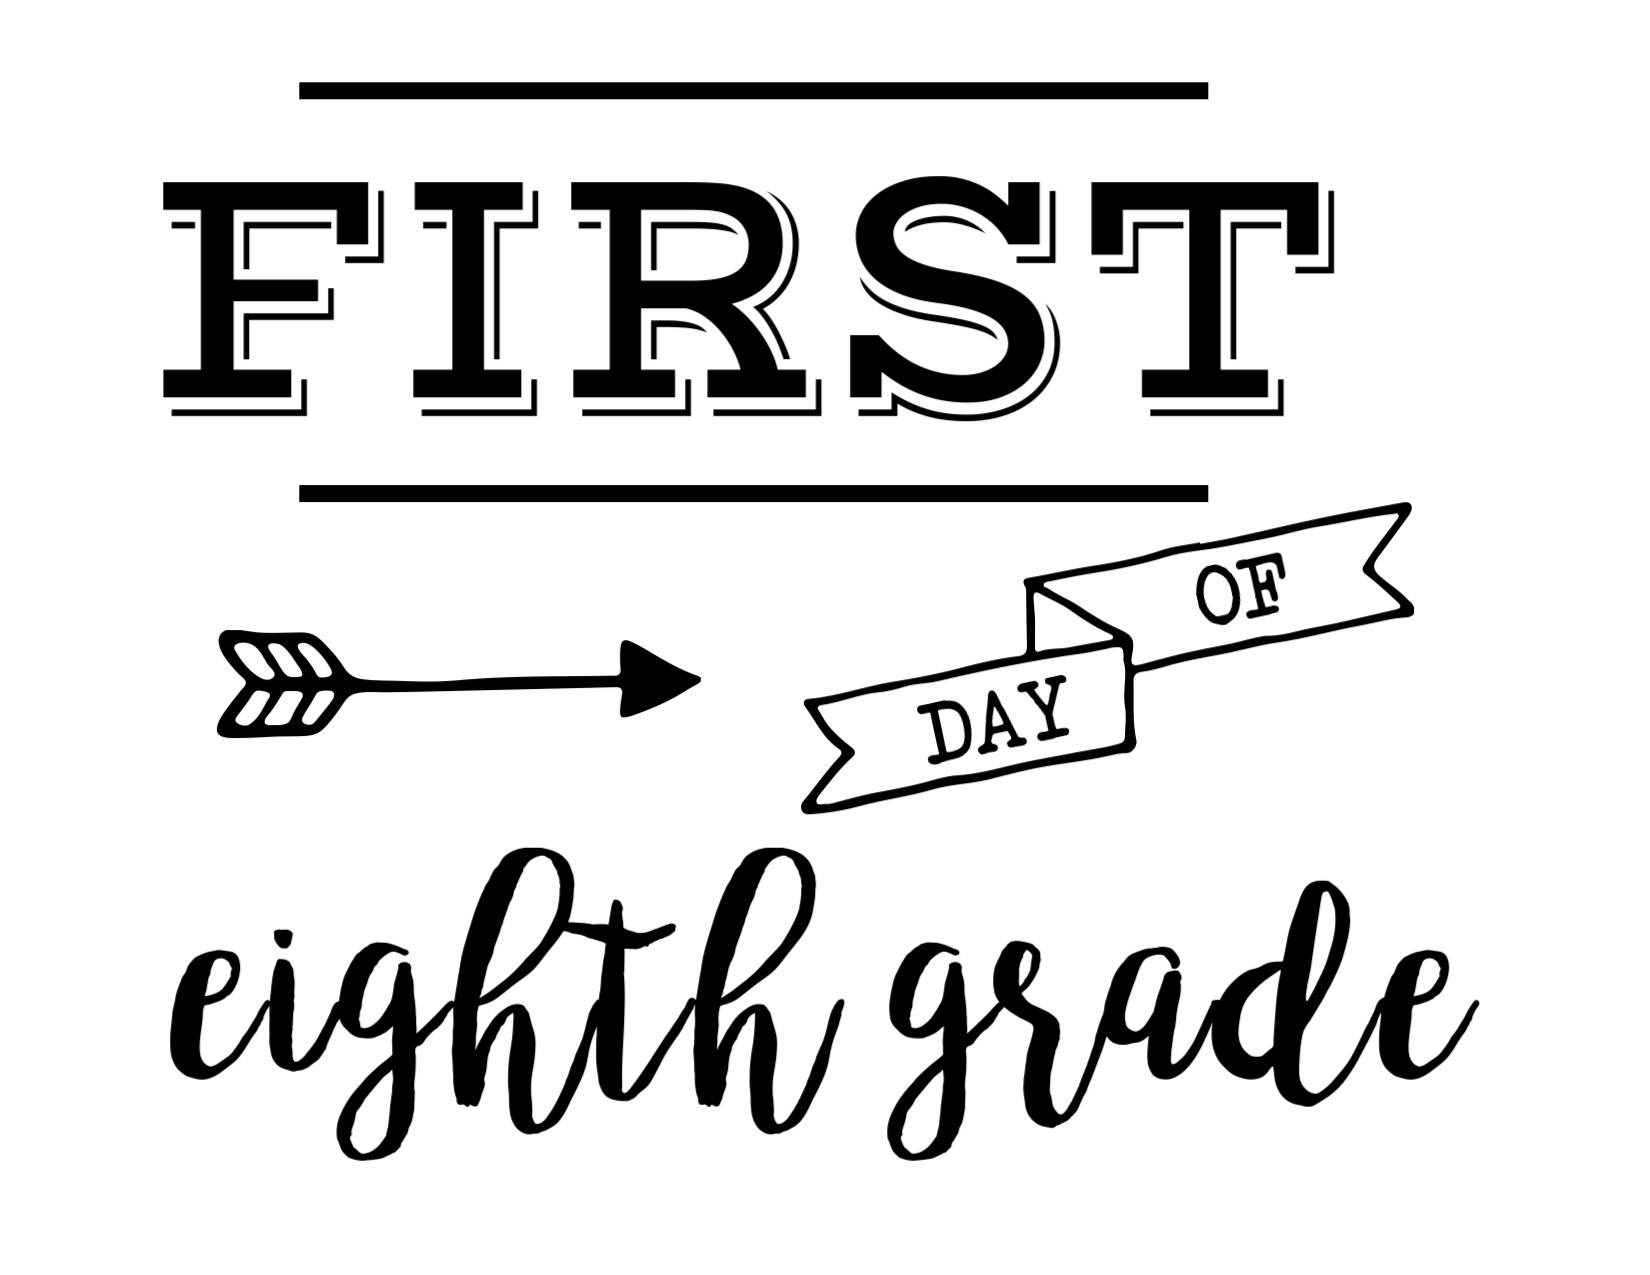 Bunting First Day of 8th Grade sign Printable First Day of School sign 2020-2021 Instant Download Eighth Grade Printable file